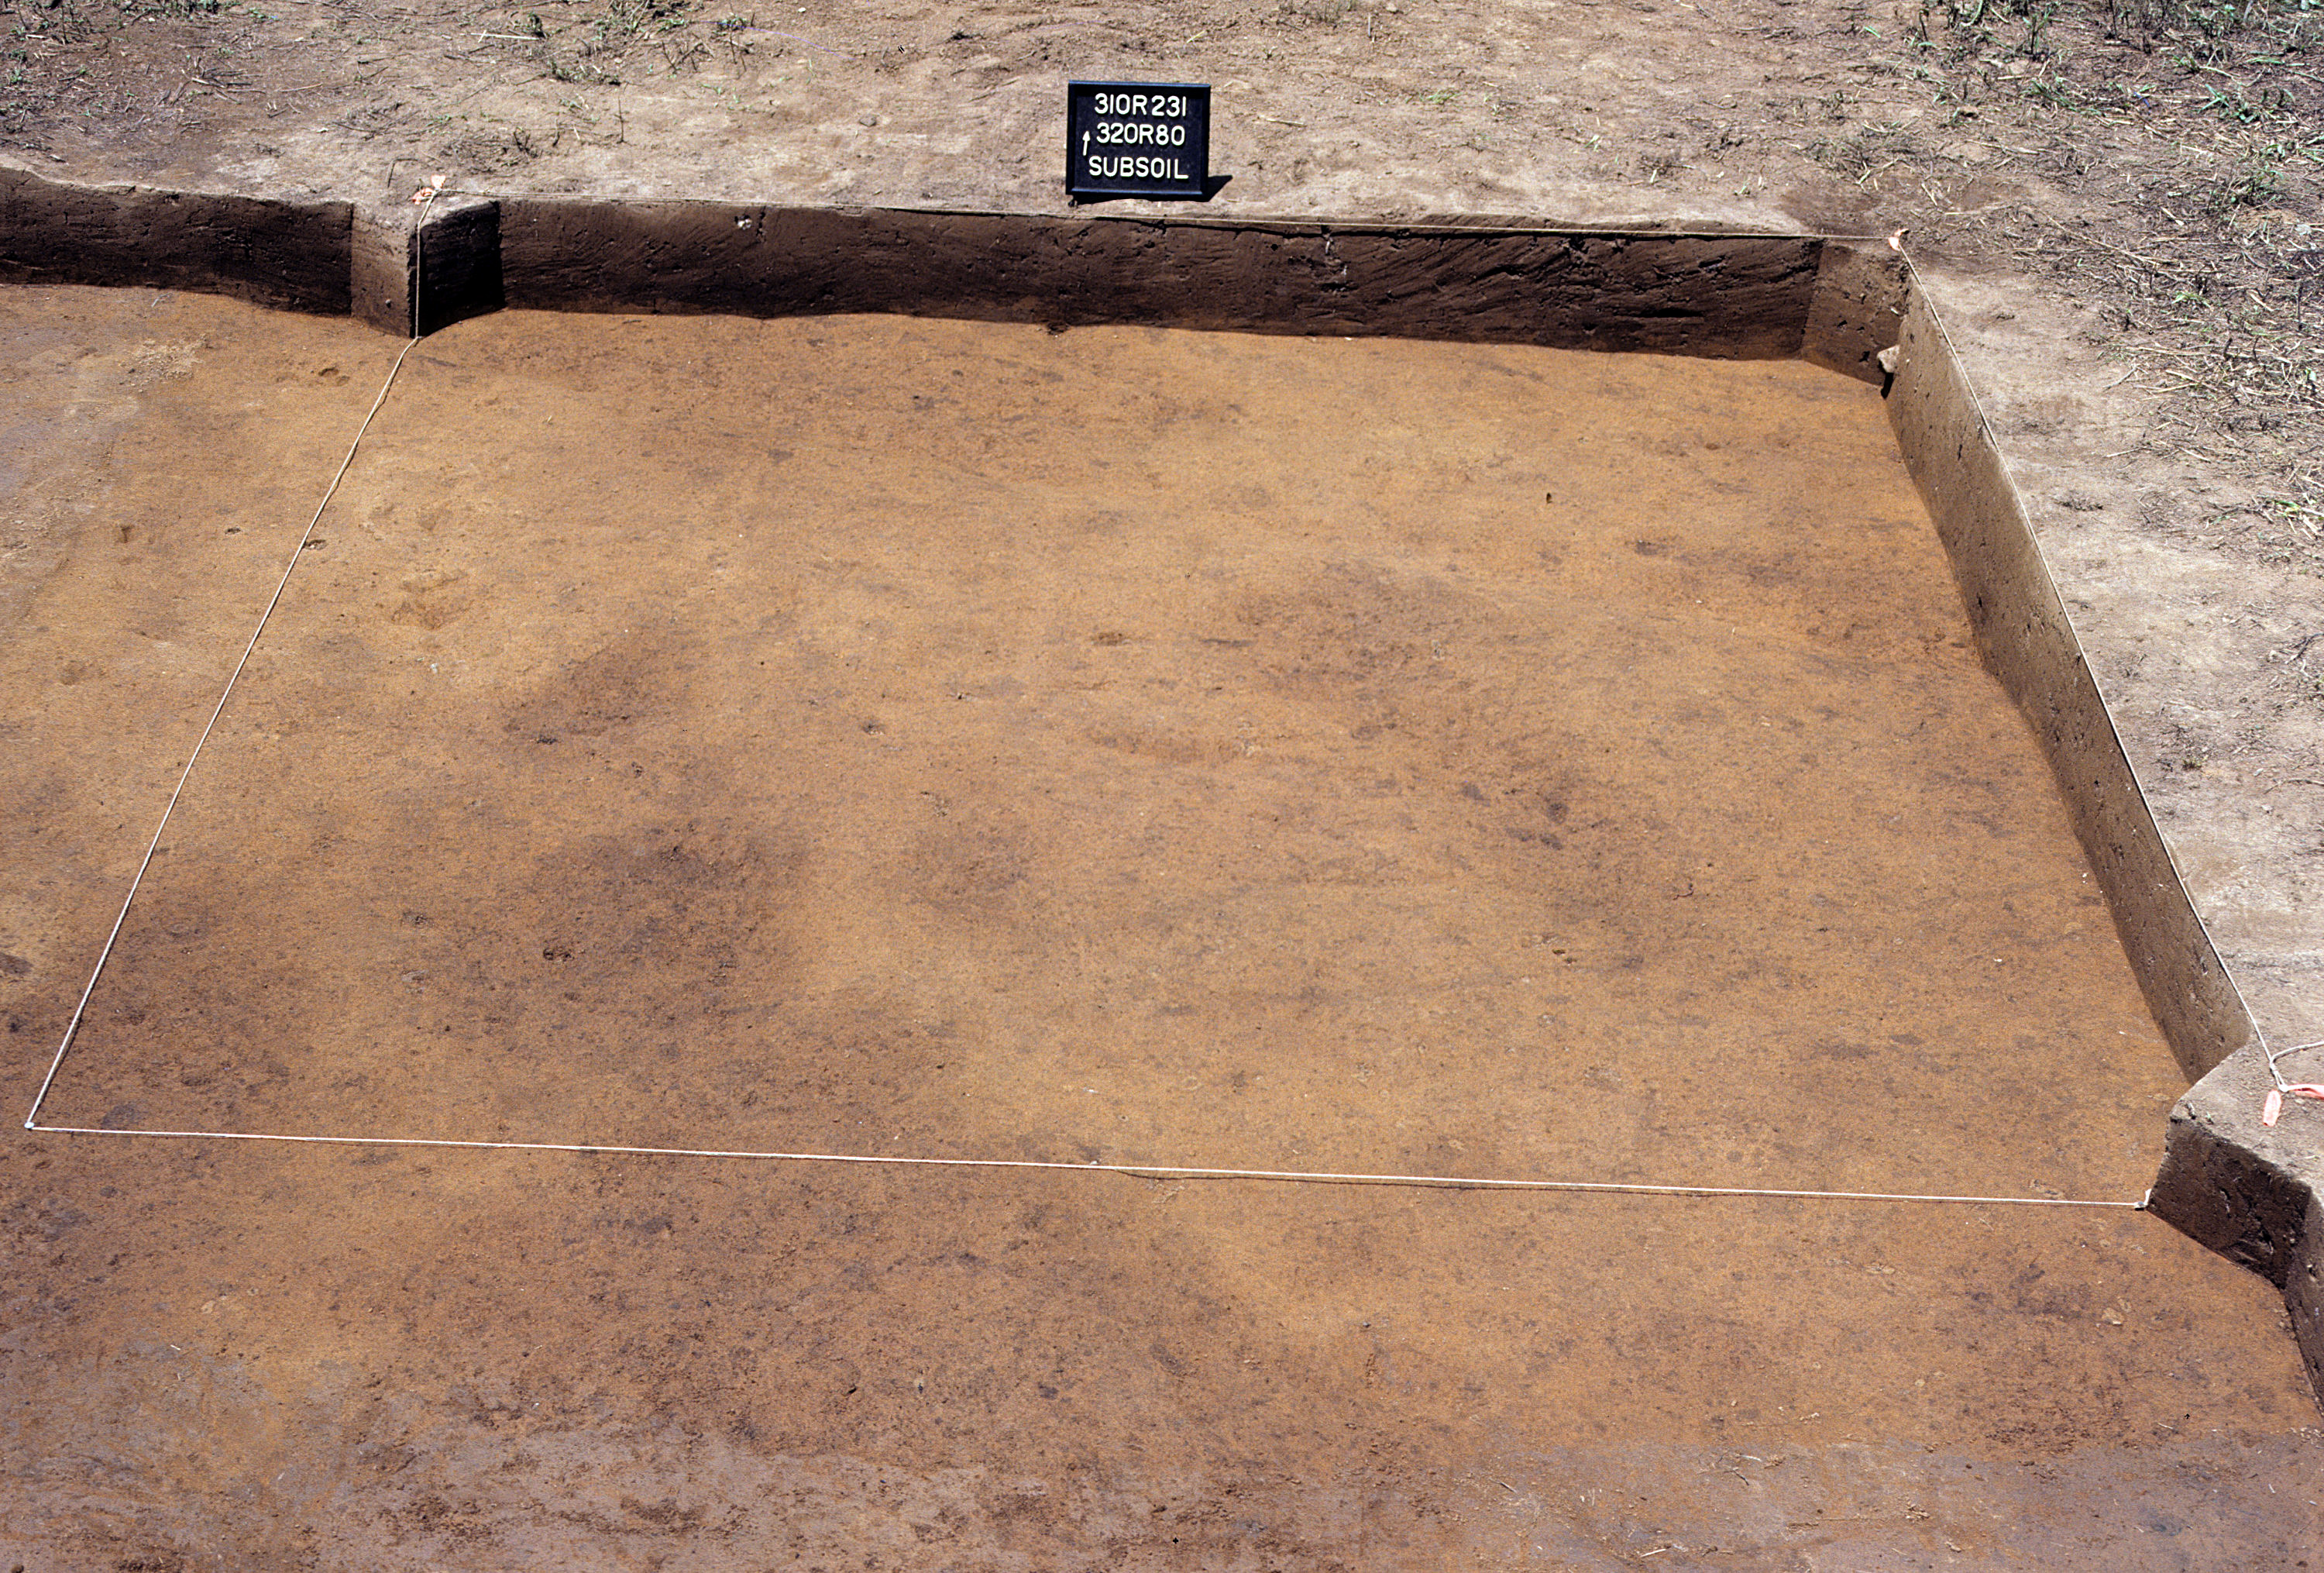 Figure 1035. Sq. 320R80 at top of subsoil (view to north).